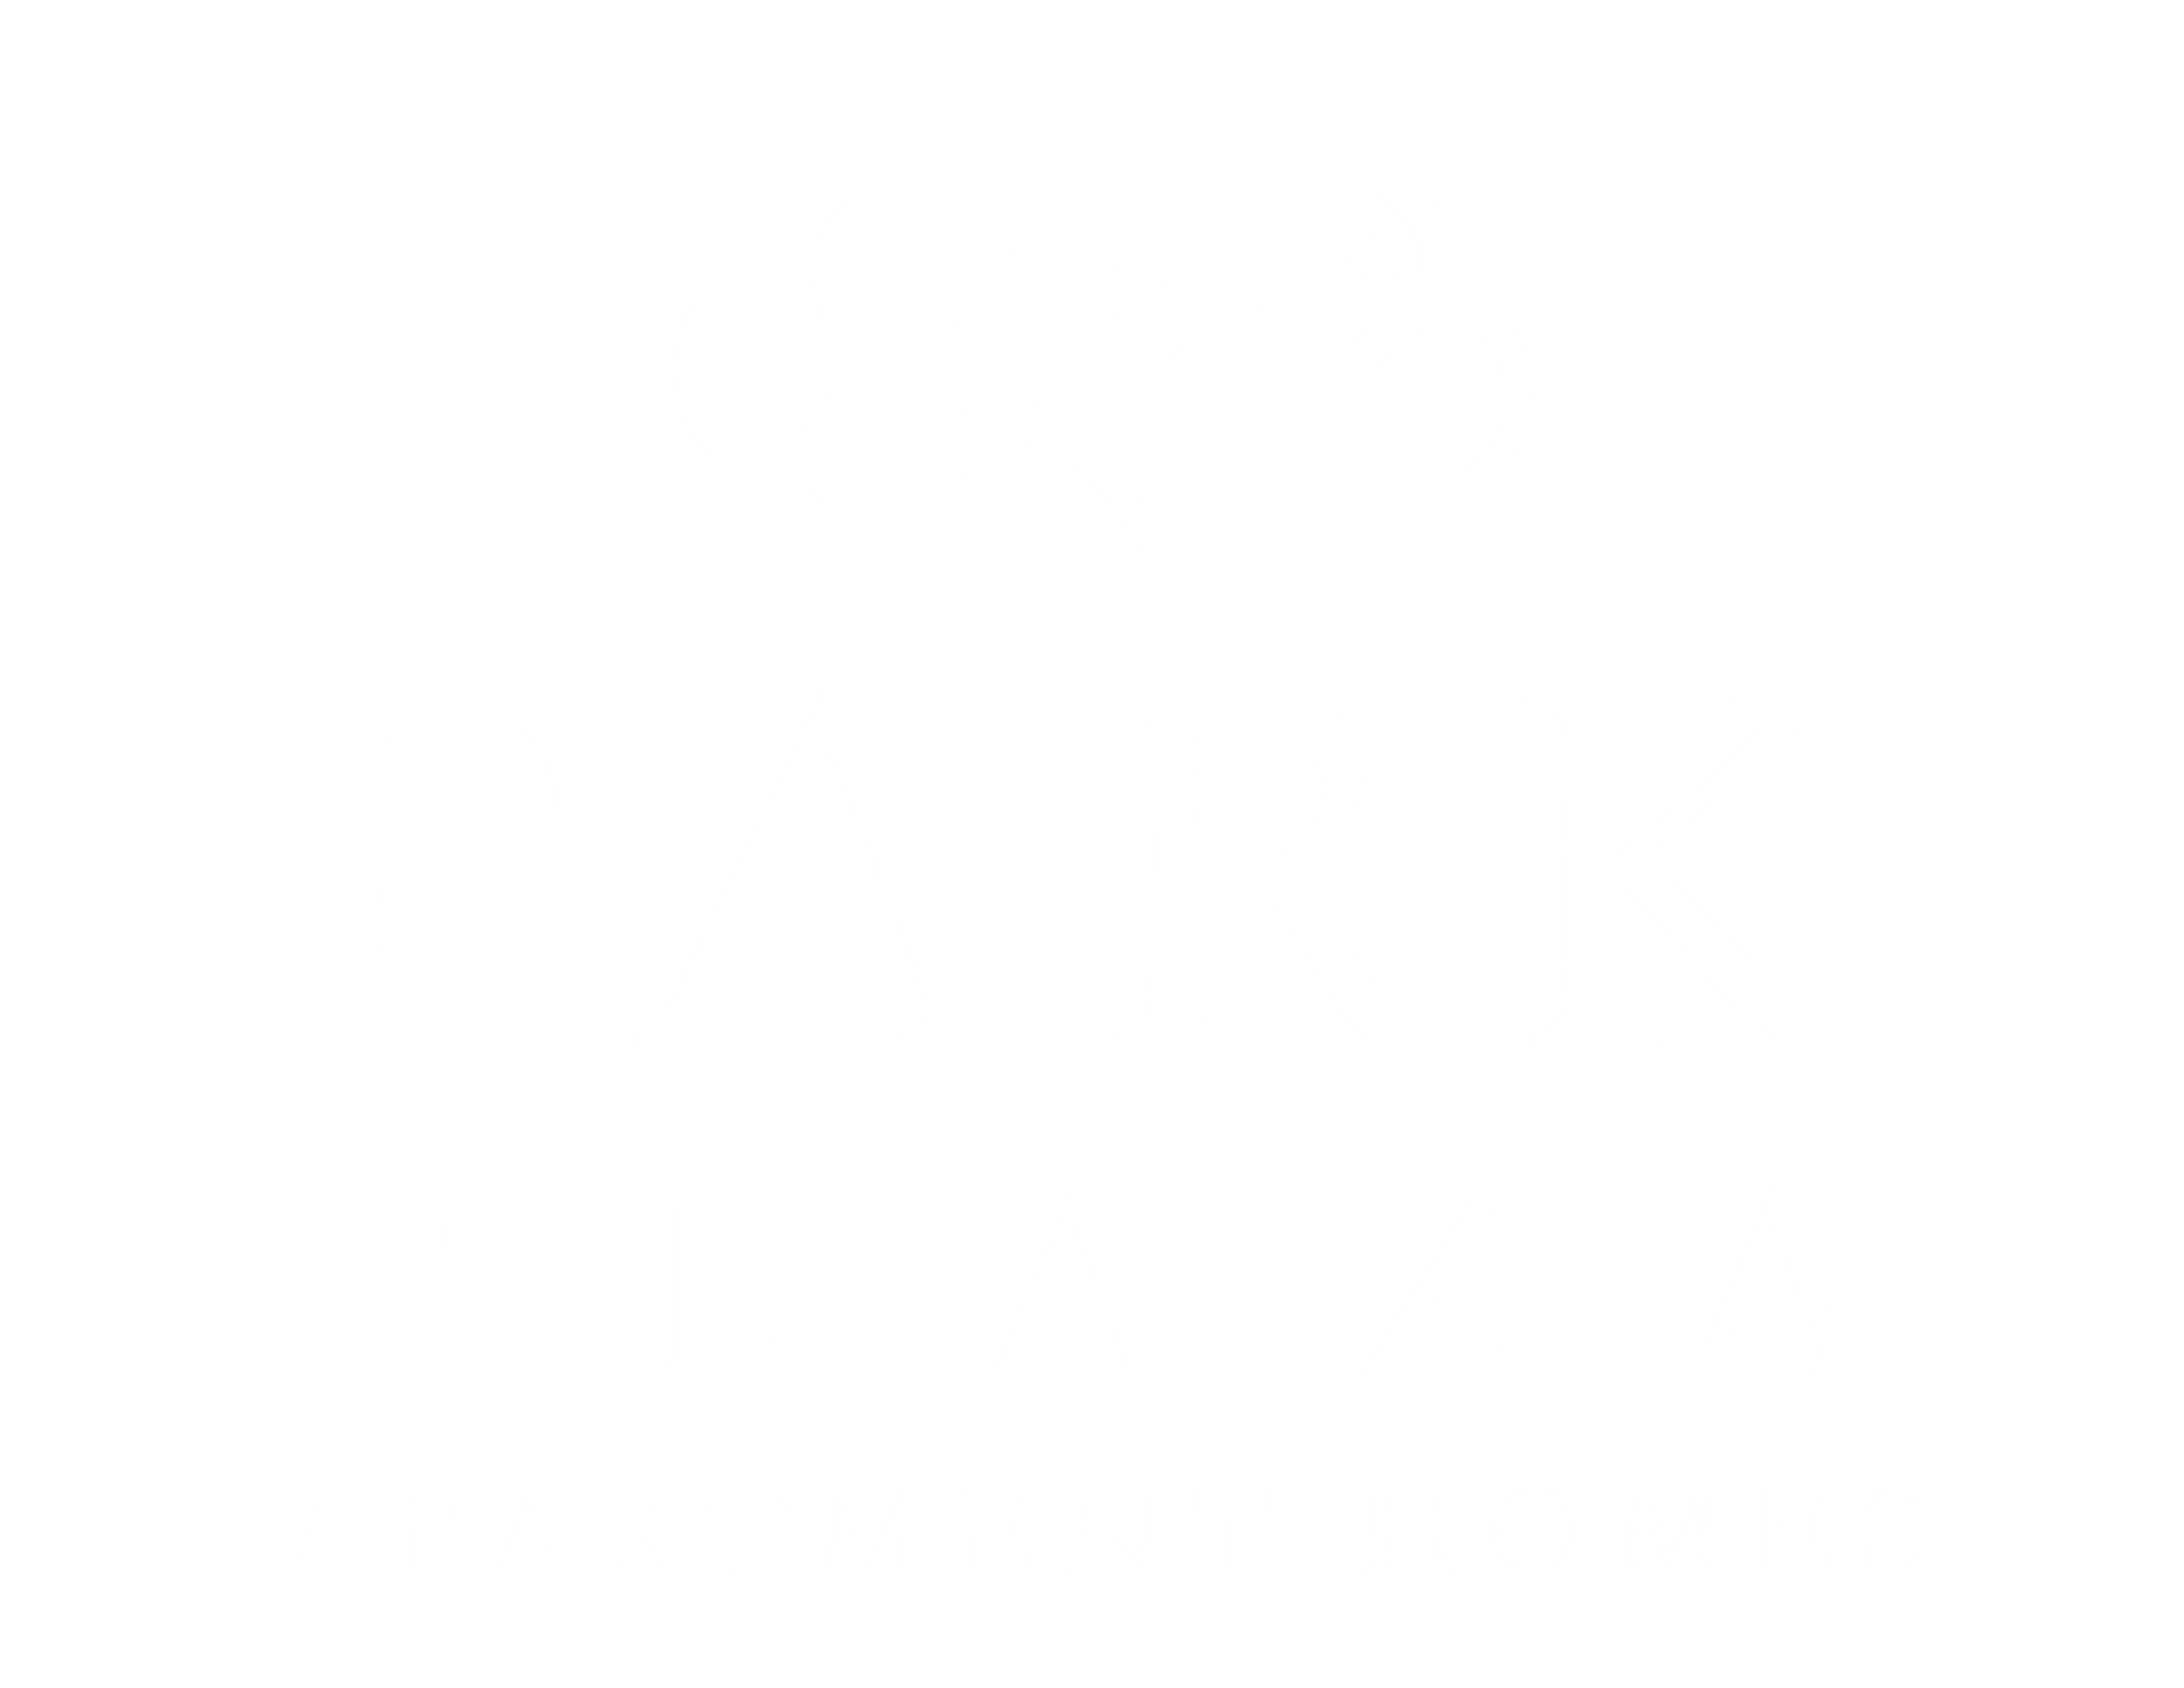 Park Plaza Apartments | Apartments in Anchorage, AK | Weidner